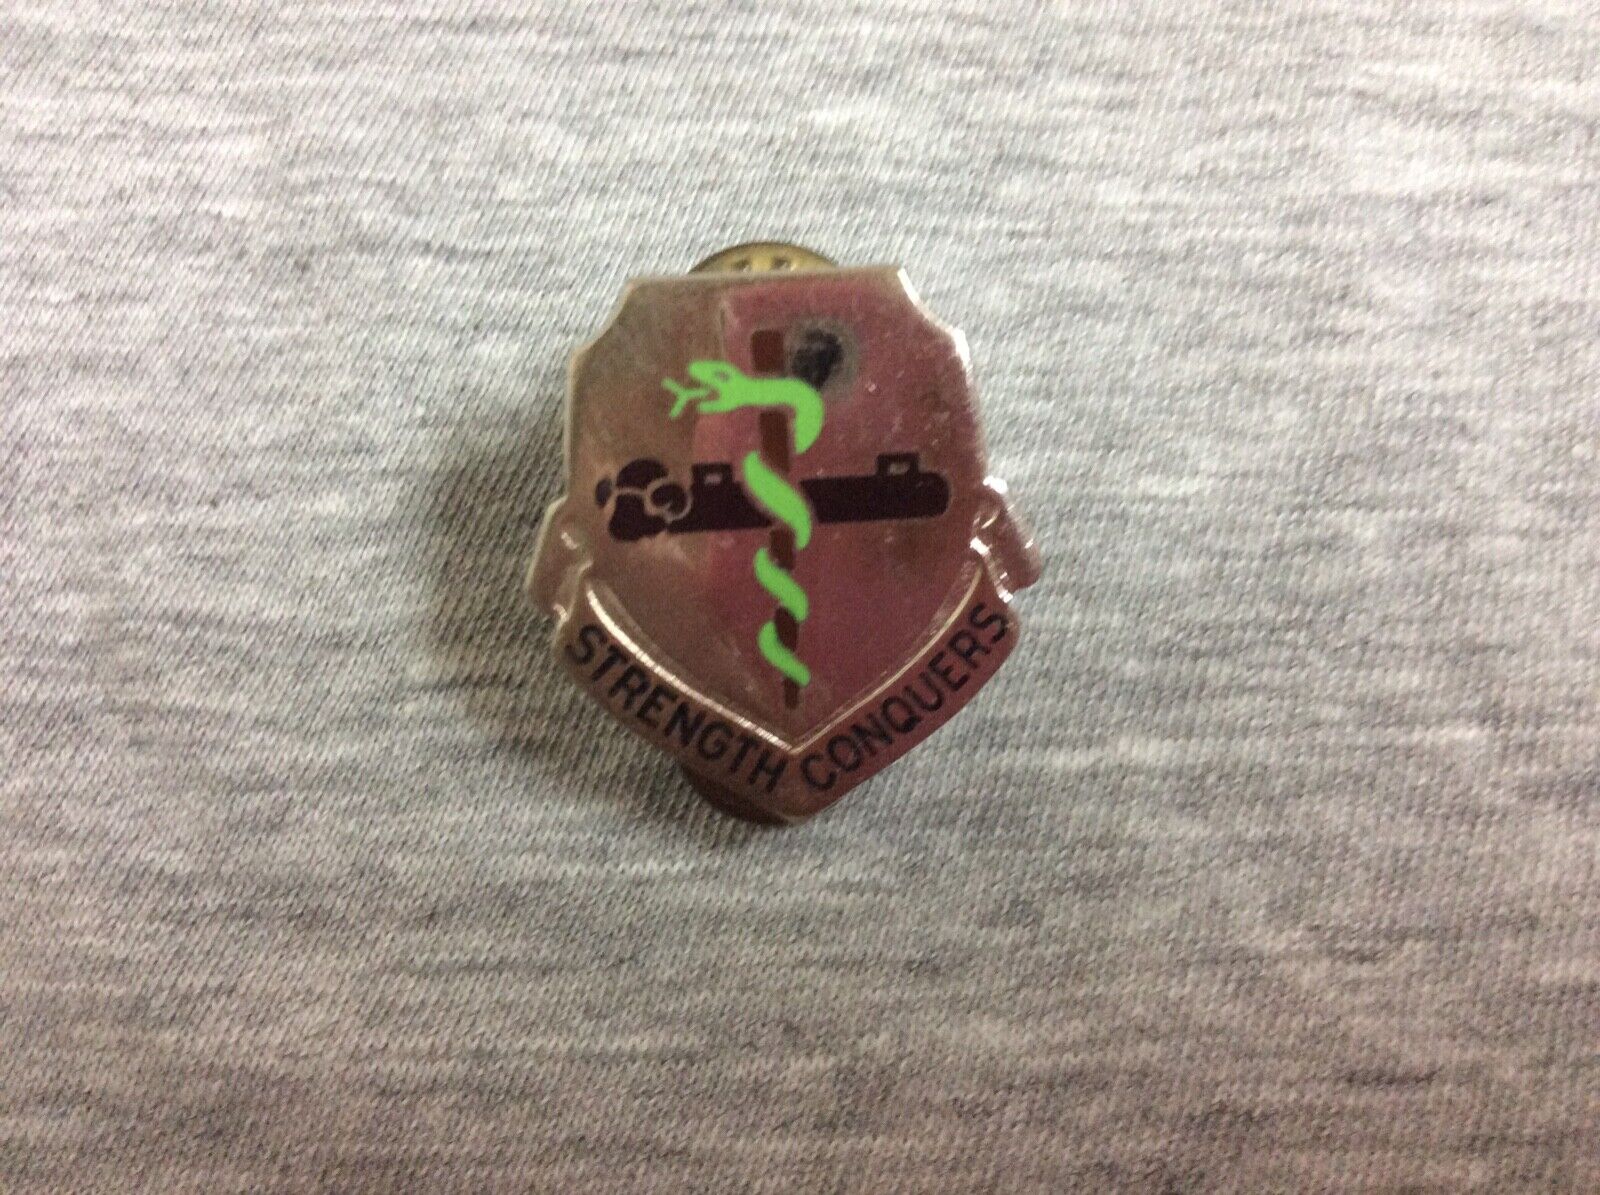 Vintage US Army Unit Crest Strength Conquers Lapel Pin